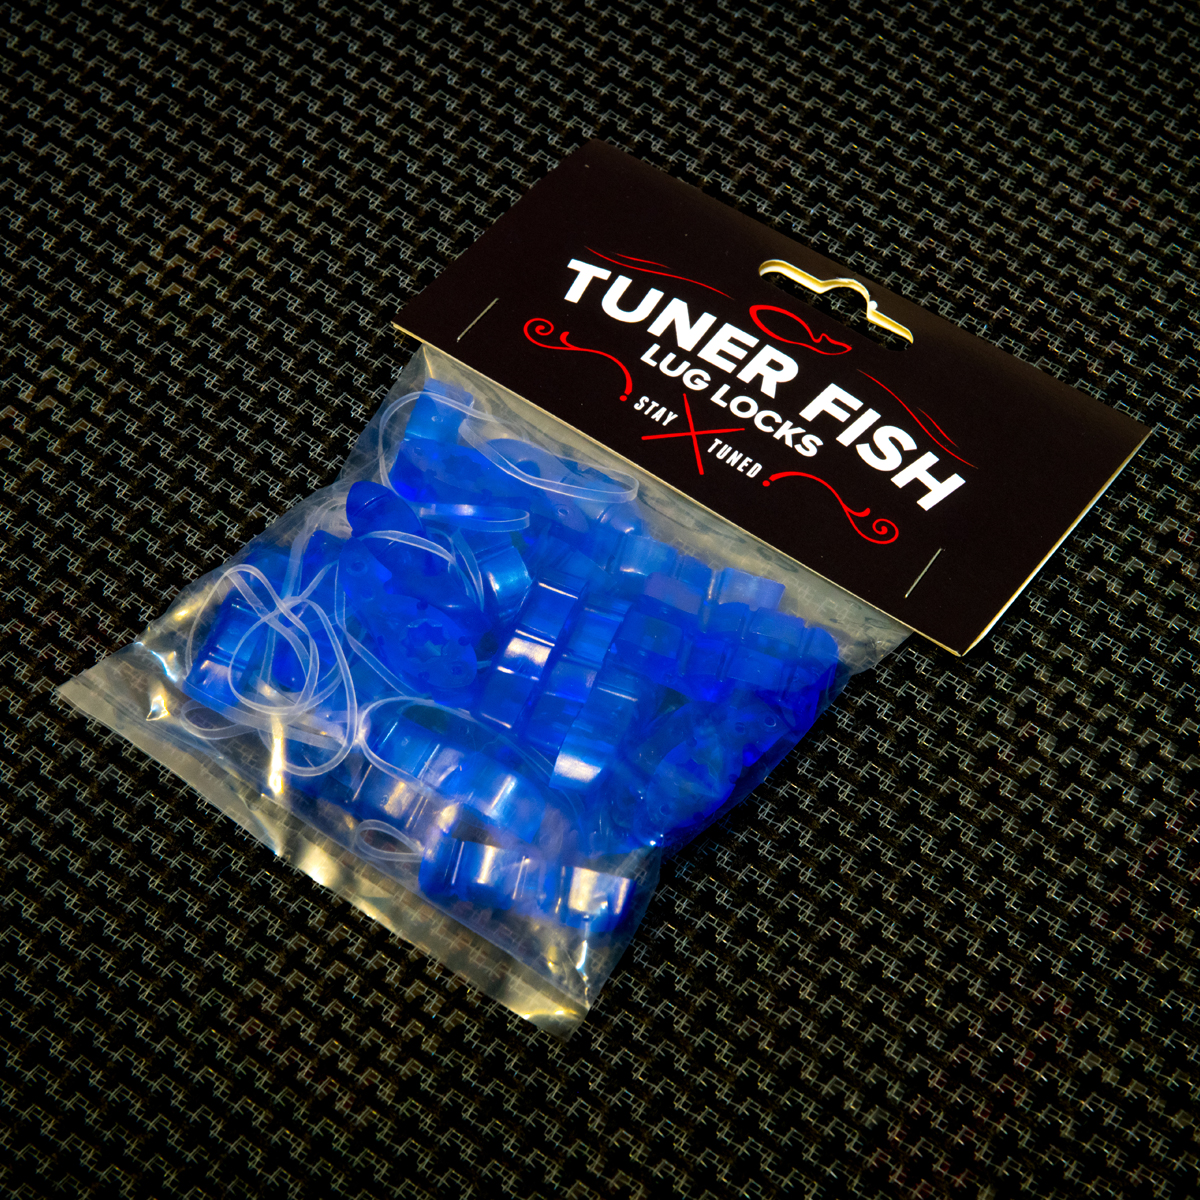 Tuner Fish Secure Bands for Lug Locks, Black at Gear4music